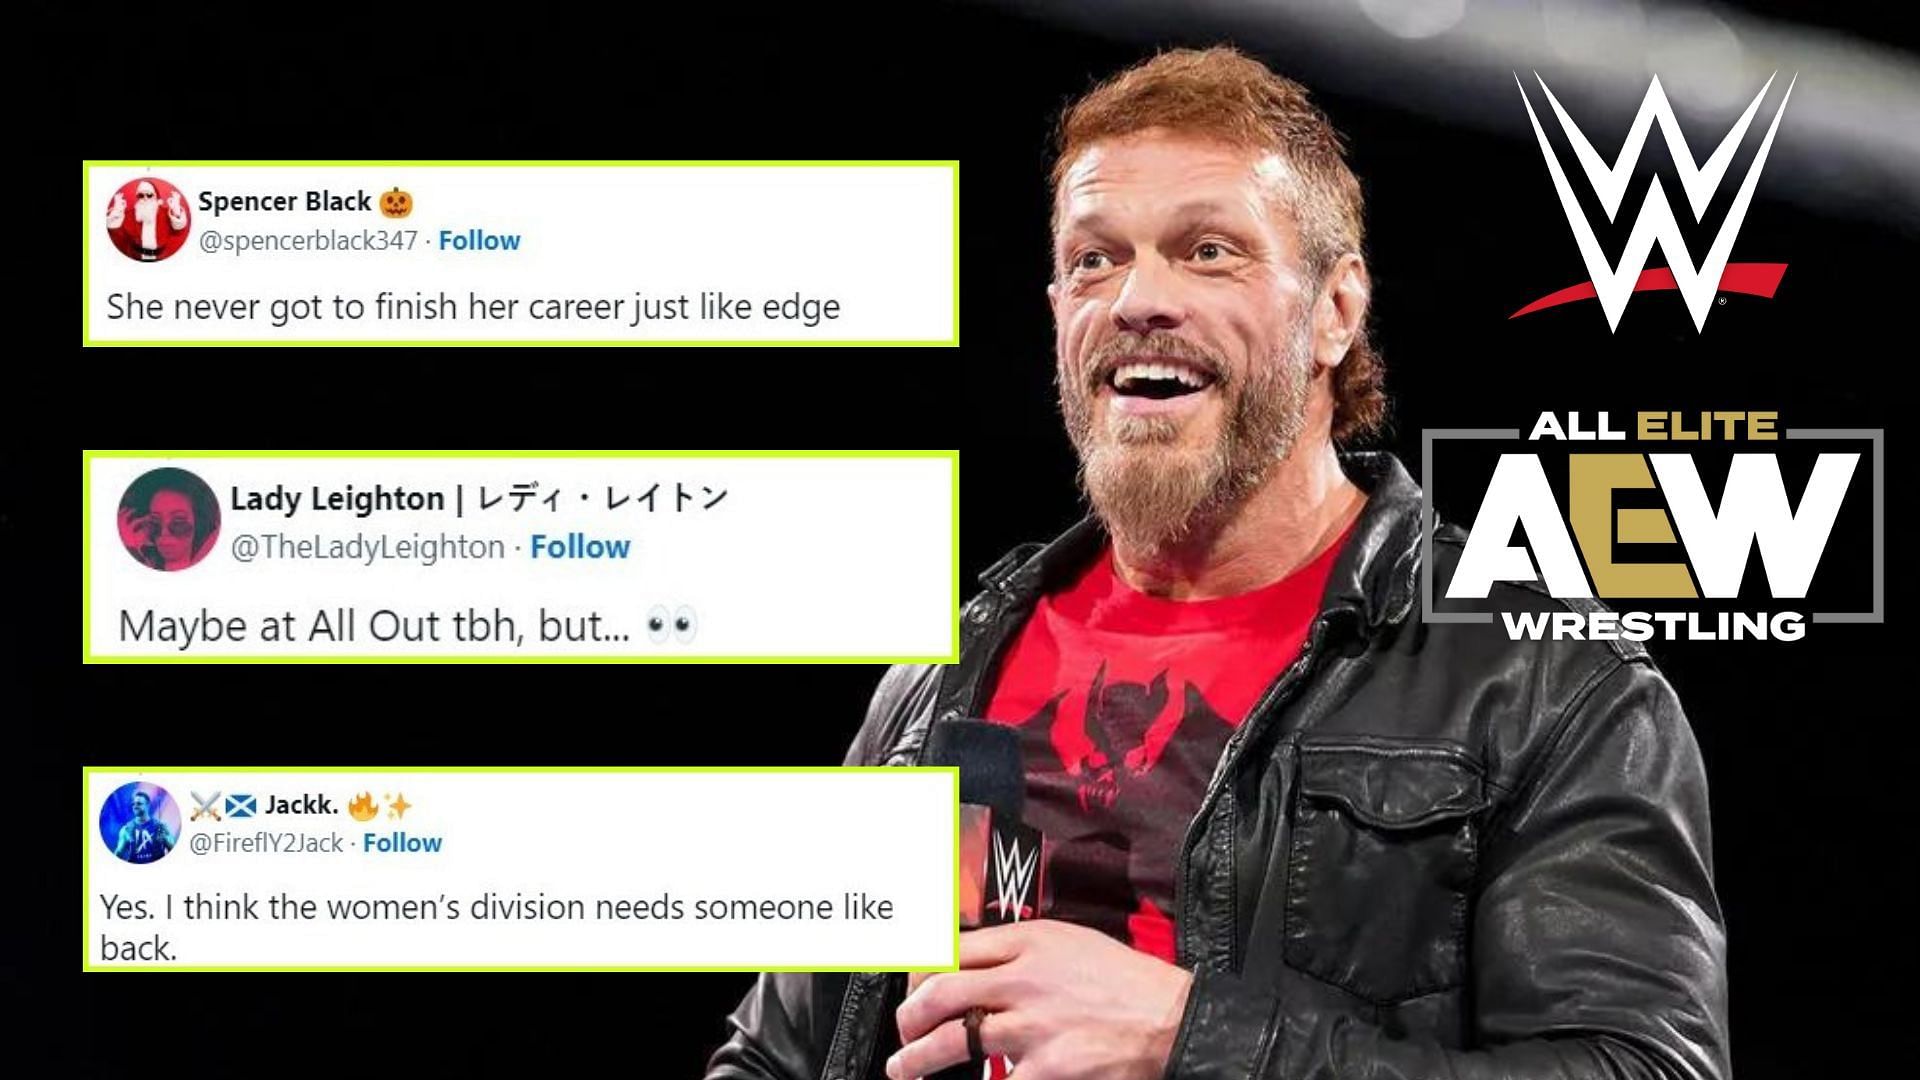 Edge is one of the top stars in WWE